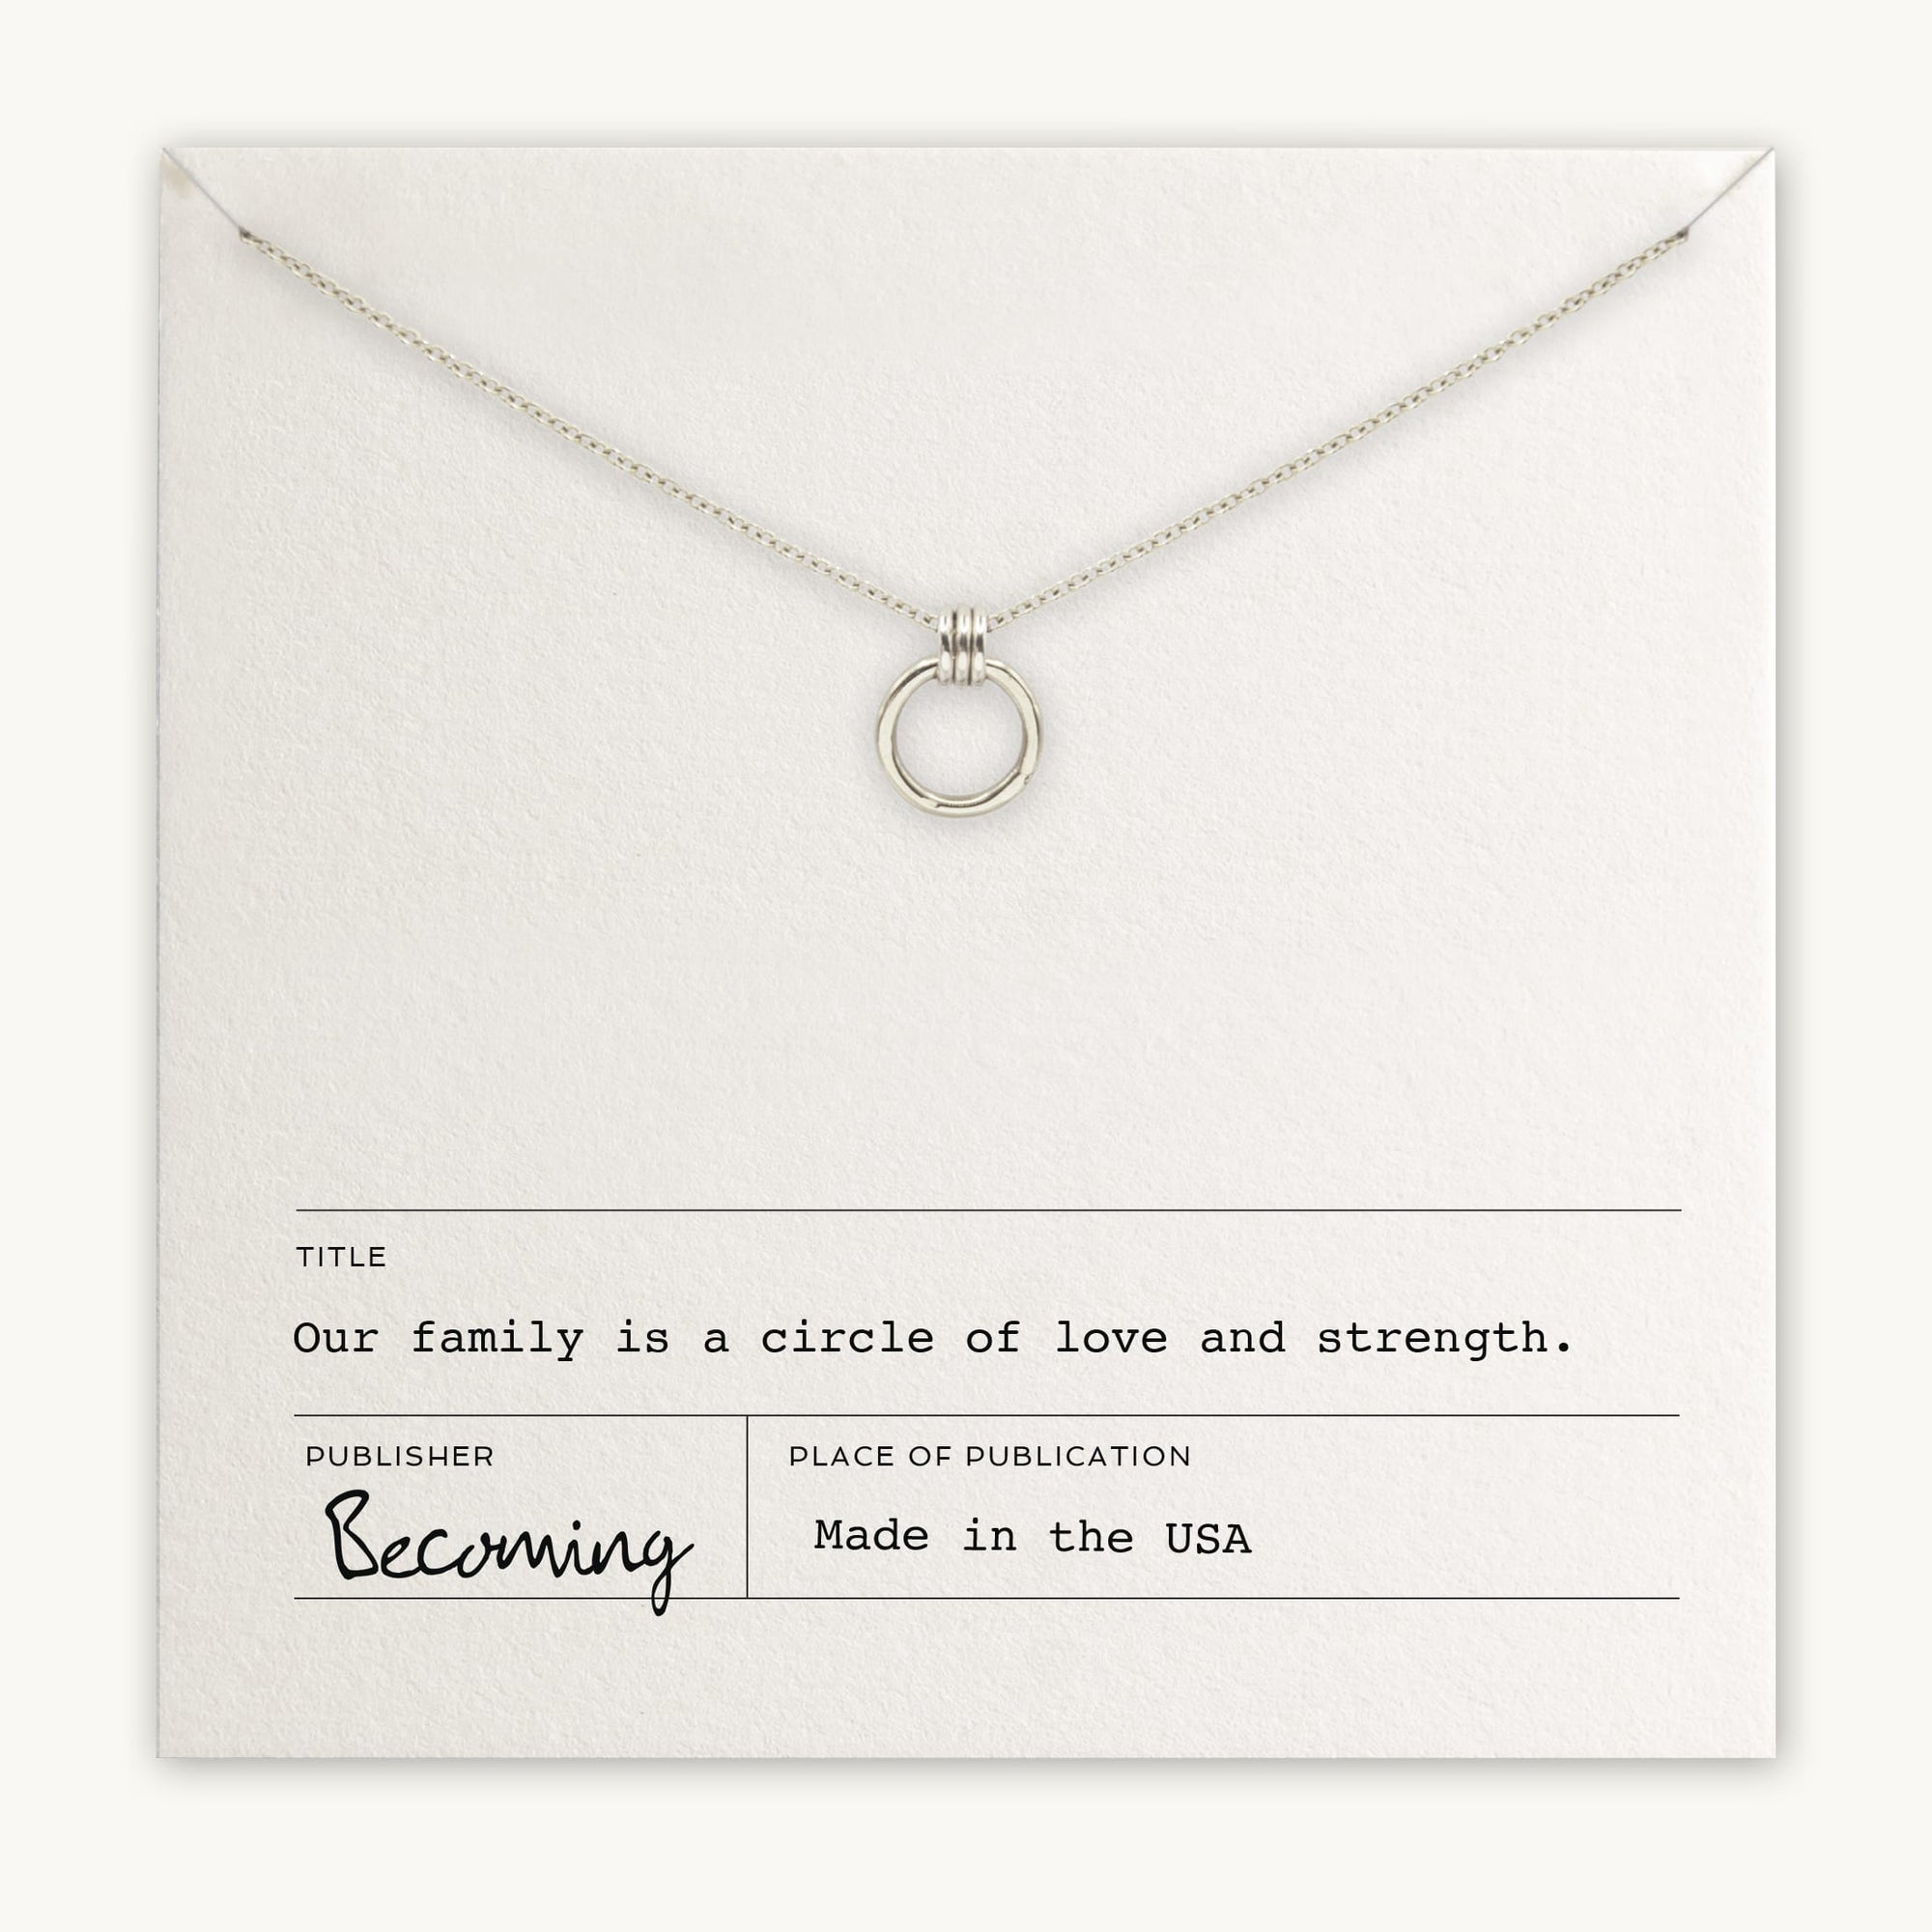 Becoming Jewelry&#39;s Family Circle Necklace on a display card with inspirational text about family love and strength, indicating the product is made in the USA.